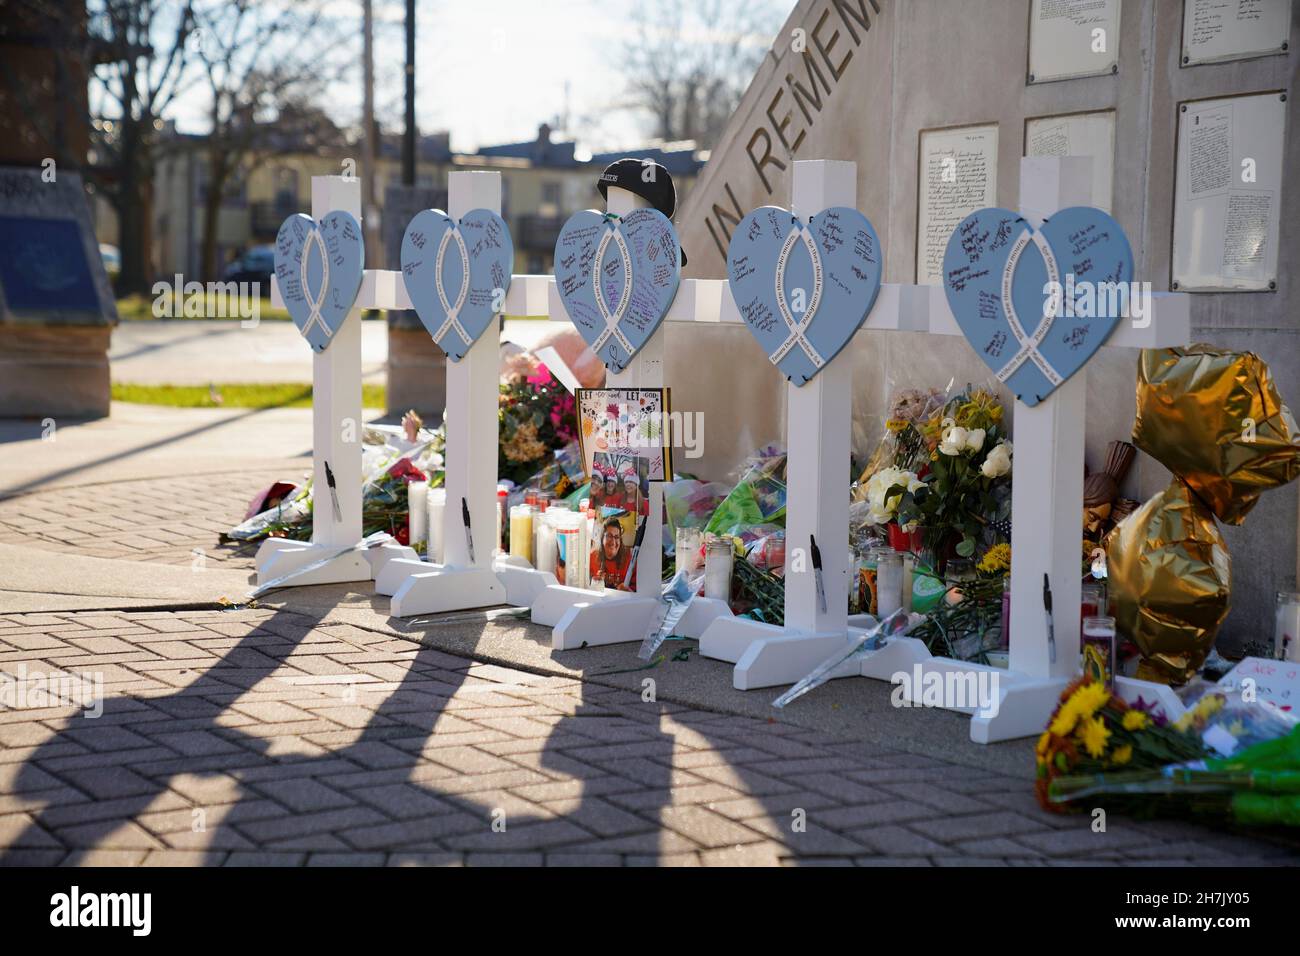 Messages to victims are seen written on crosses after a car plowed through a holiday parade in Waukesha, Wisconsin, U.S., November 23, 2021. REUTERS/Cheney Orr Stock Photo